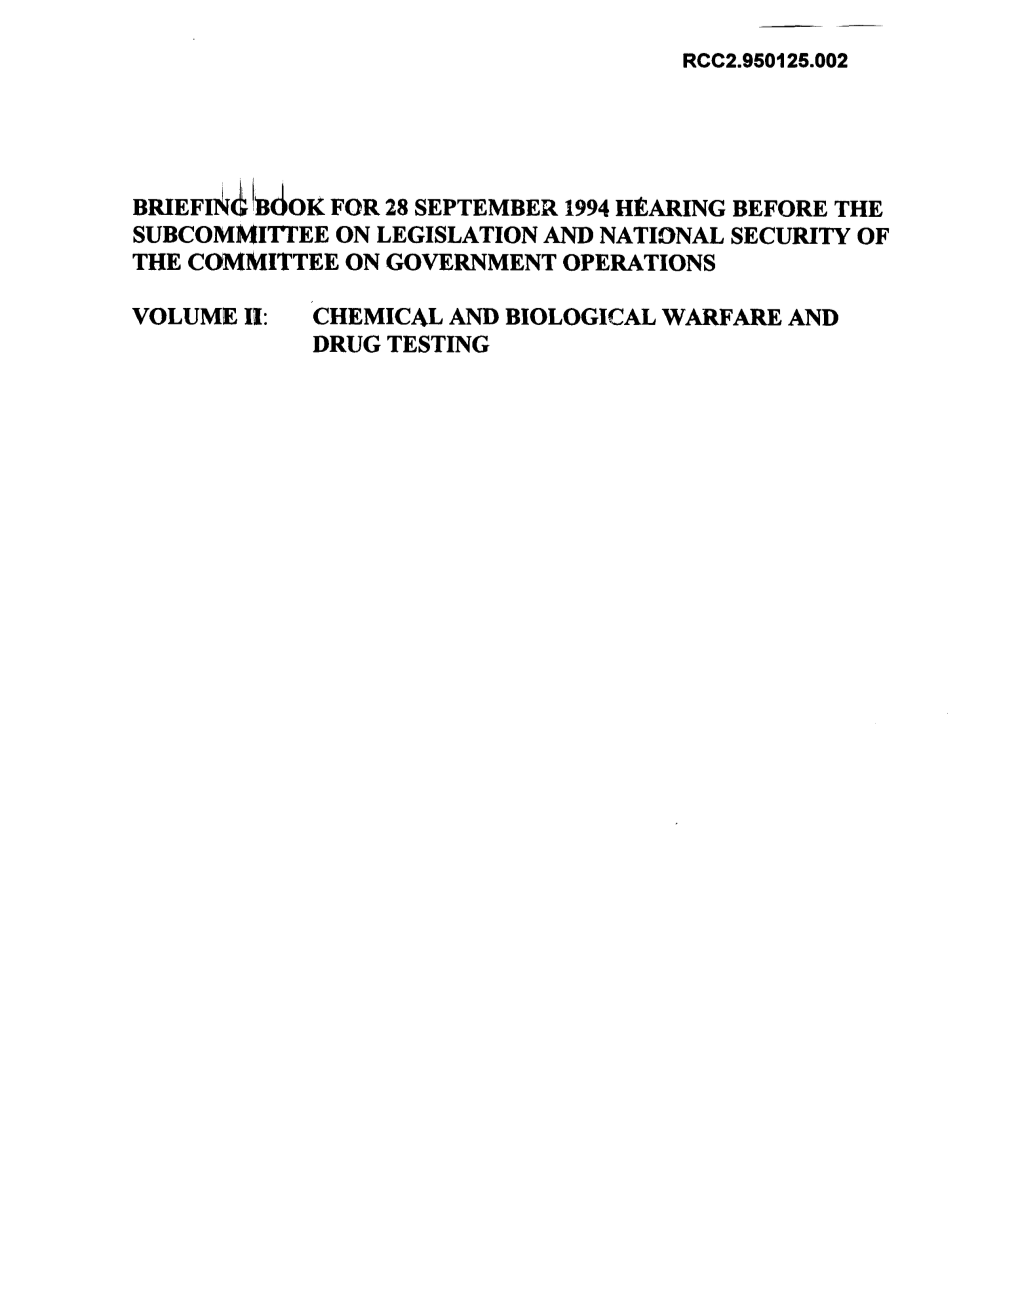 VOLUME II: CHEMICAL and BIOLOGICAL WARFARE and DRUG TESTING L Briefing Book Two: Chemical and Biological Warfare Program and Drug Testing Program Information